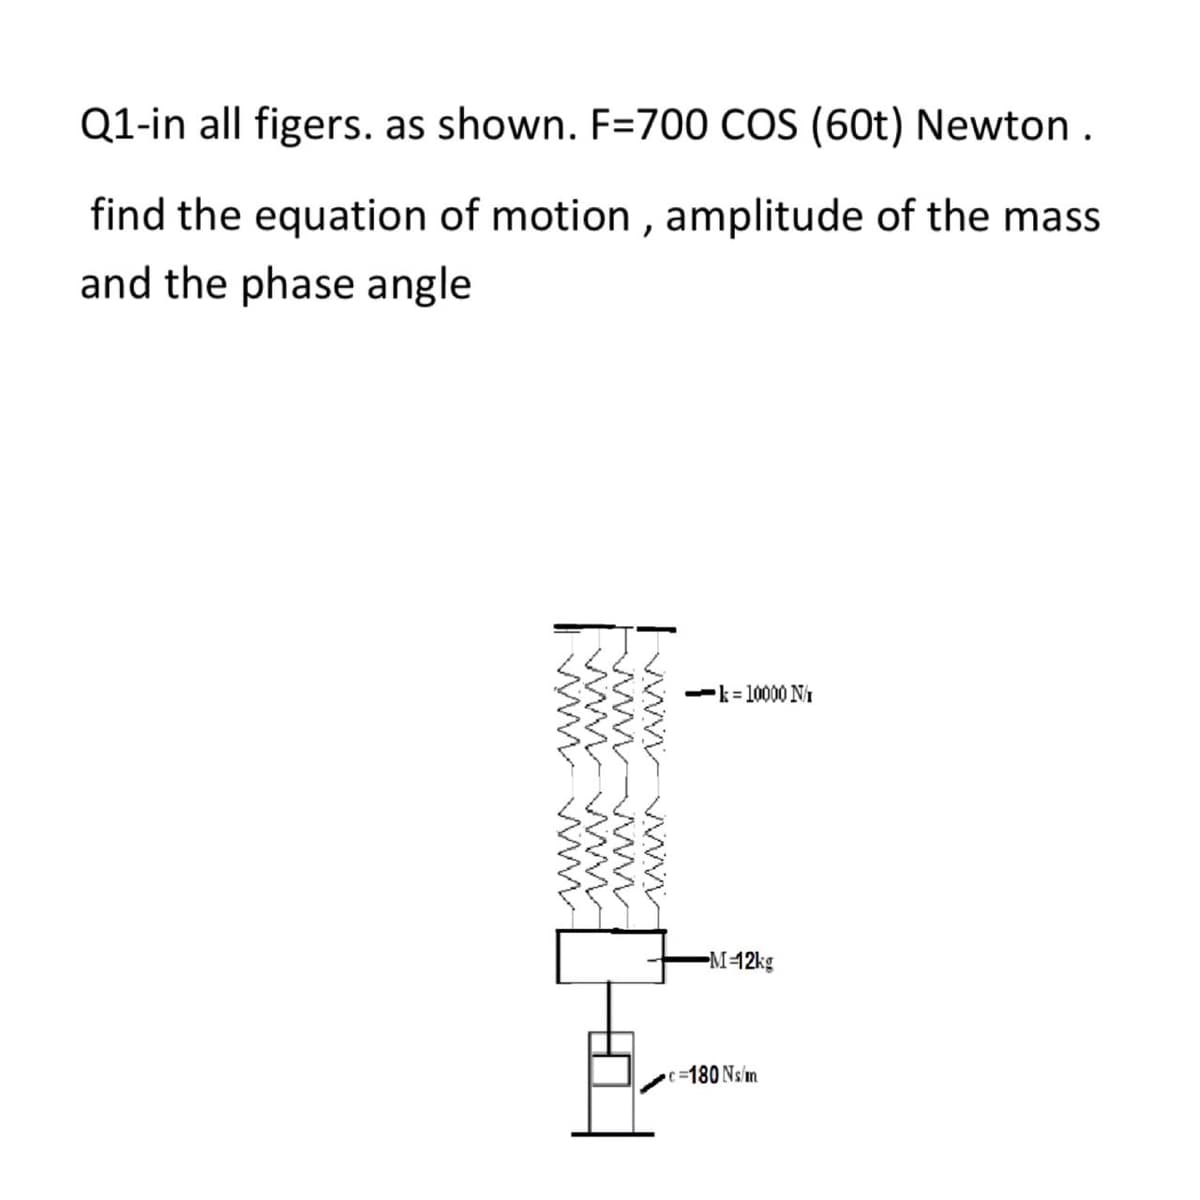 Q1-in all figers. as shown. F=700 COS (60t) Newton .
find the equation of motion , amplitude of the mass
and the phase angle
-k= 10000 NI
M-42kg
e3180 Nsim
wwwww
